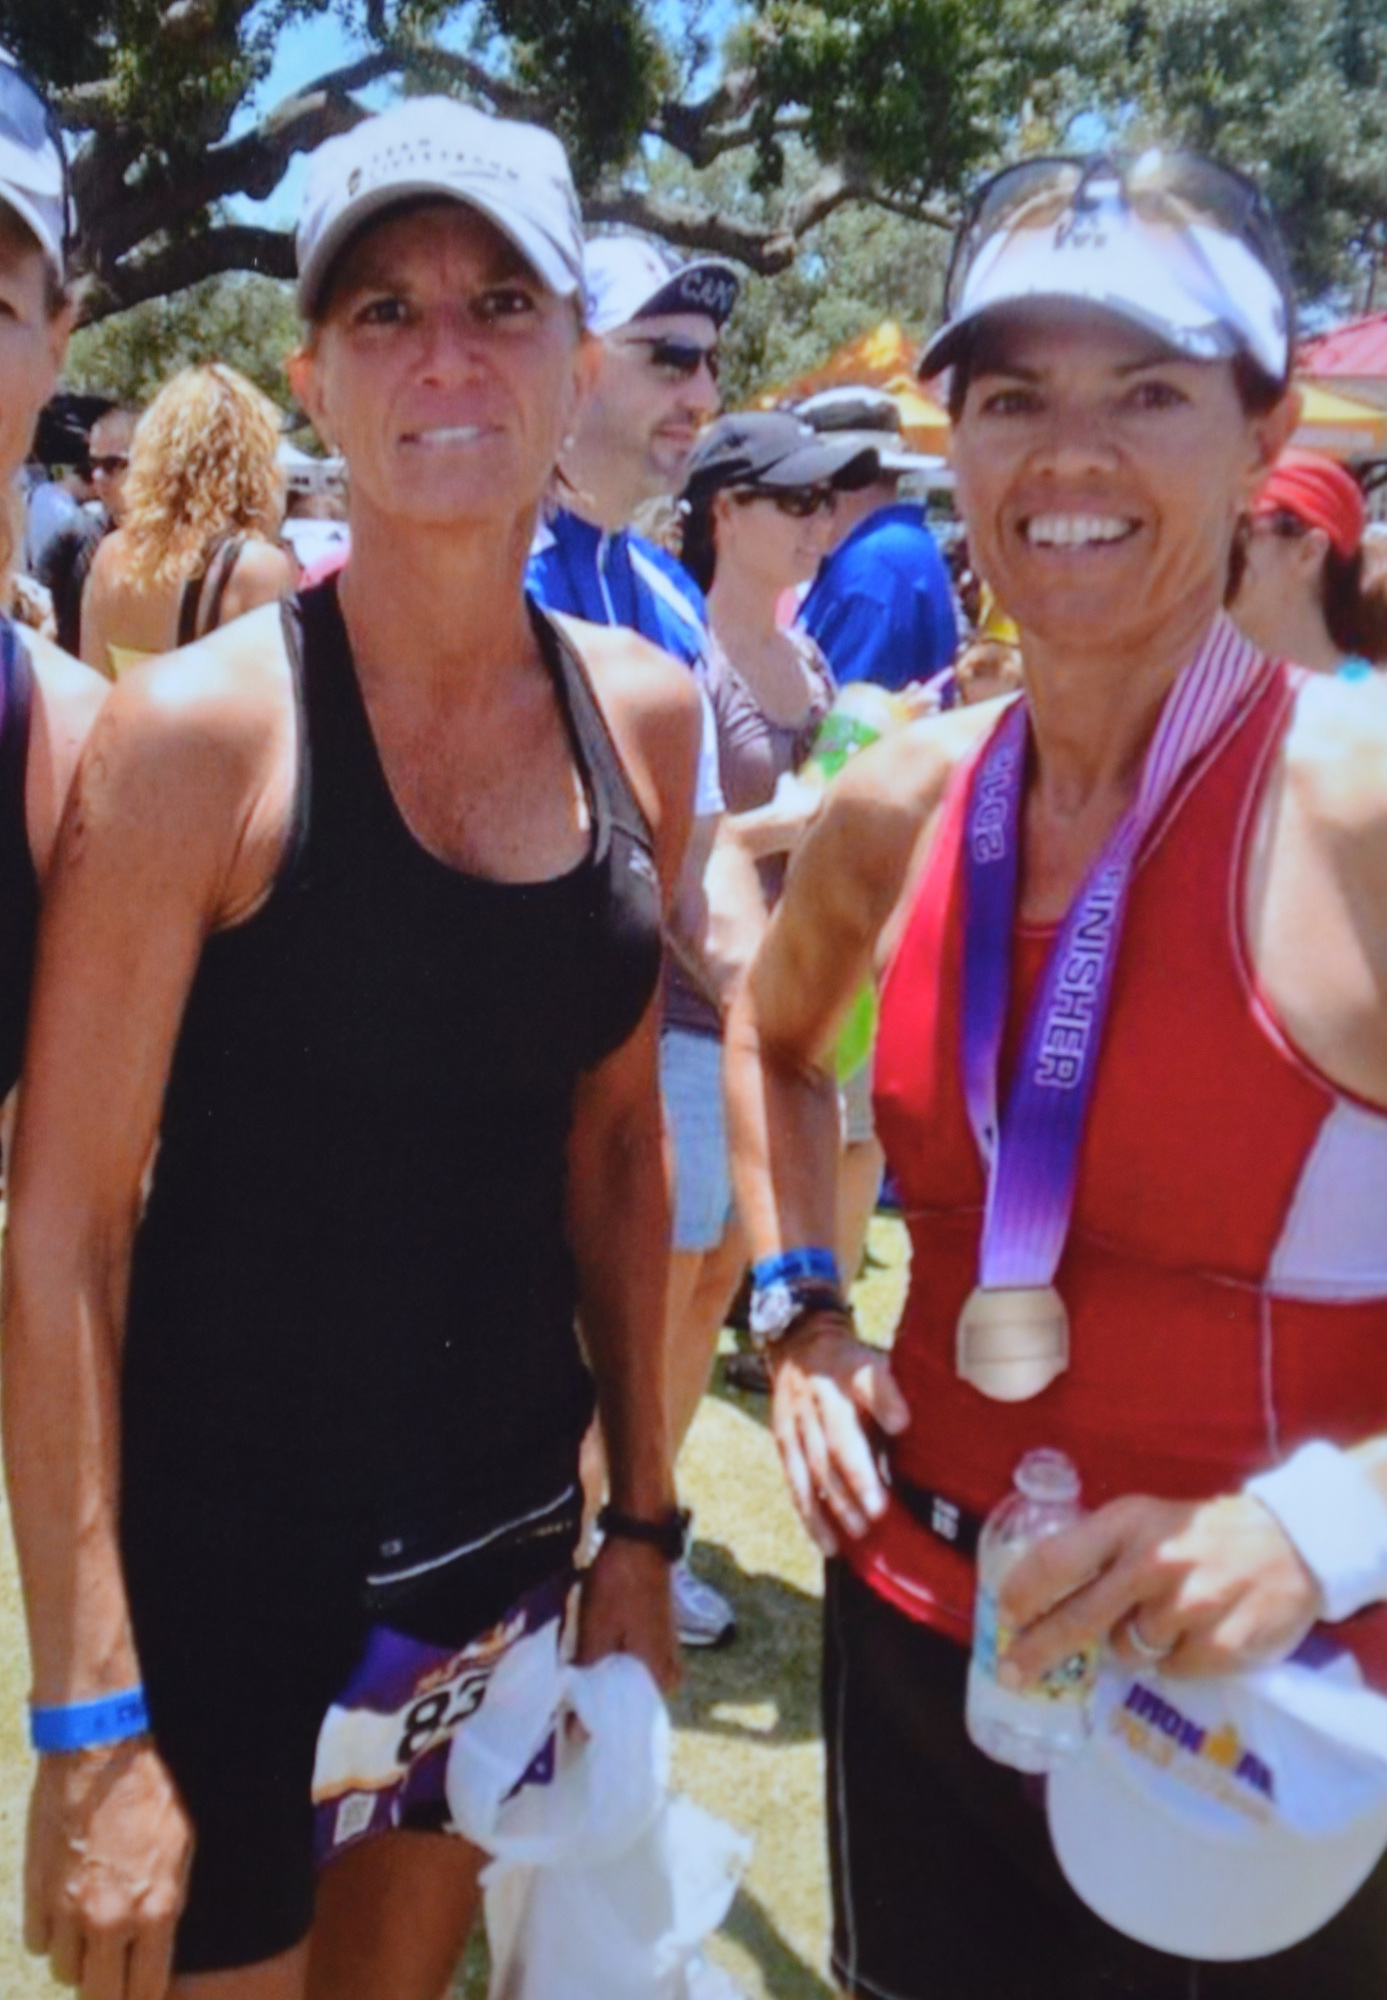 Courtesy photo. Sharon Butler and Eve Goldberg were best friends and each other's fiercest competition in local triathlons. Here they are after crossing the finish line at the 2012 Ironman half marathon.